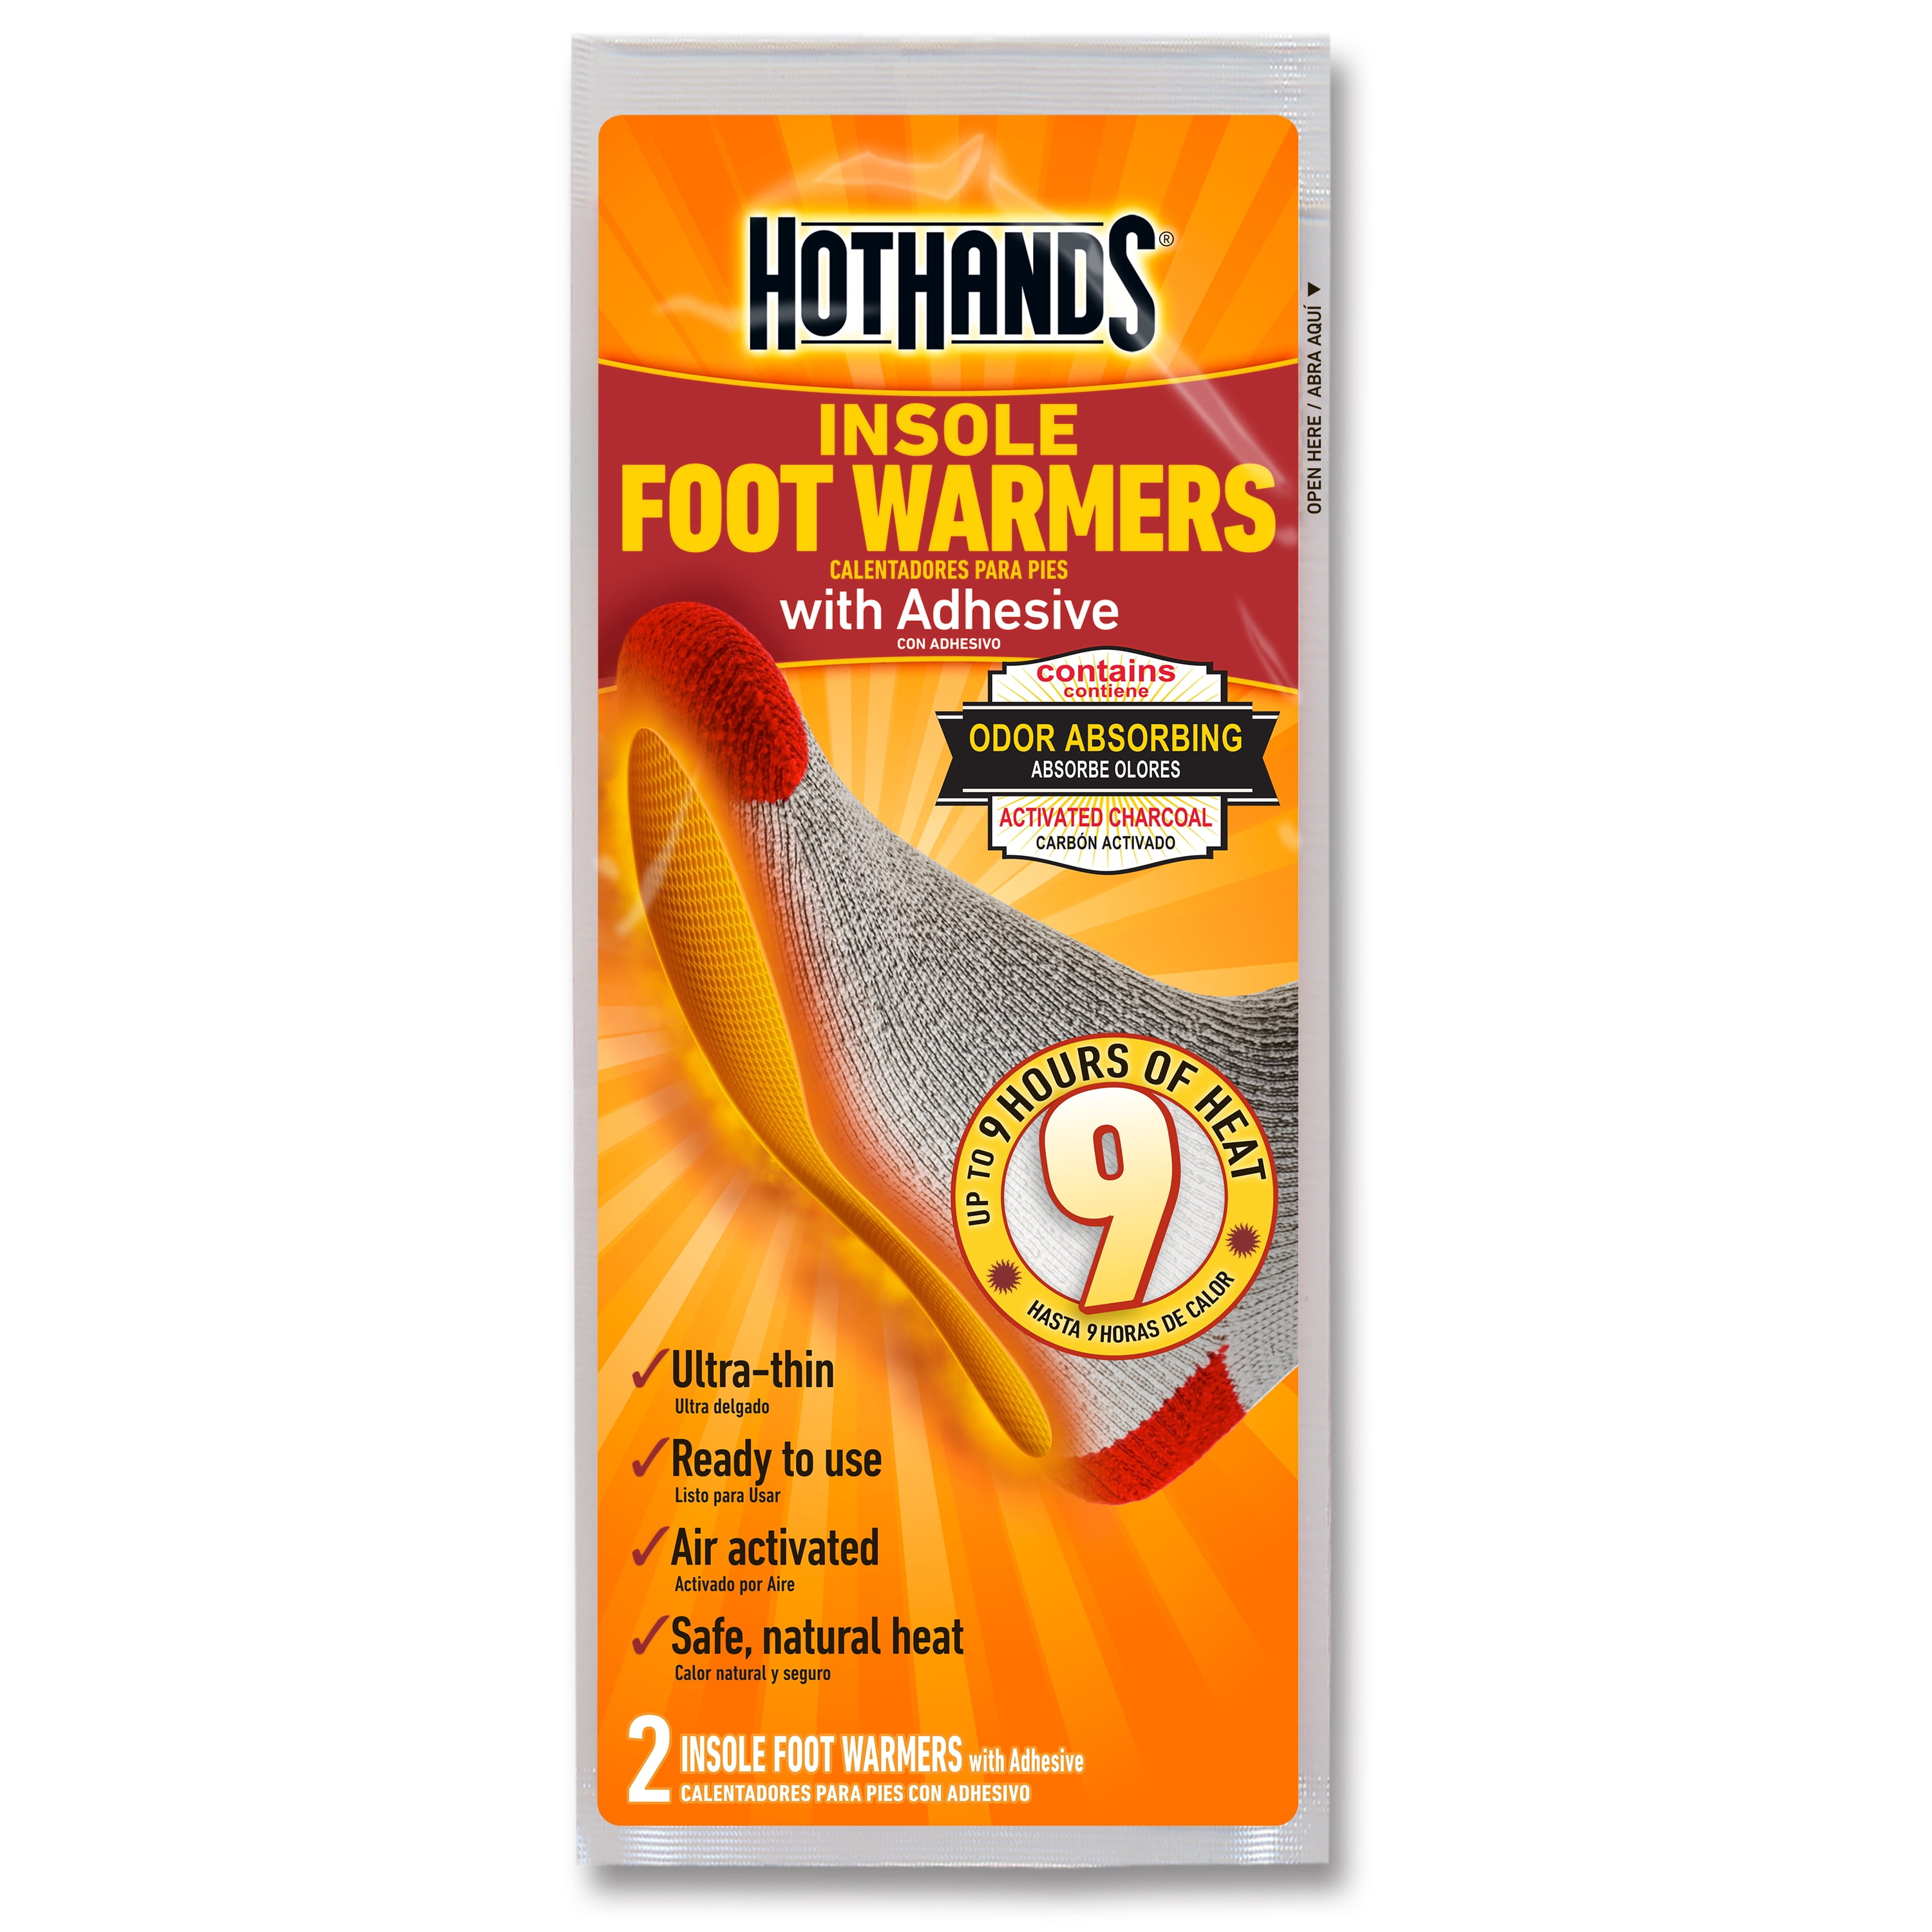 One Pair|HotHands Toasti Toes Foot Warmer One Pair for sale online HeatMax Toasti Toes Foot Warmer 